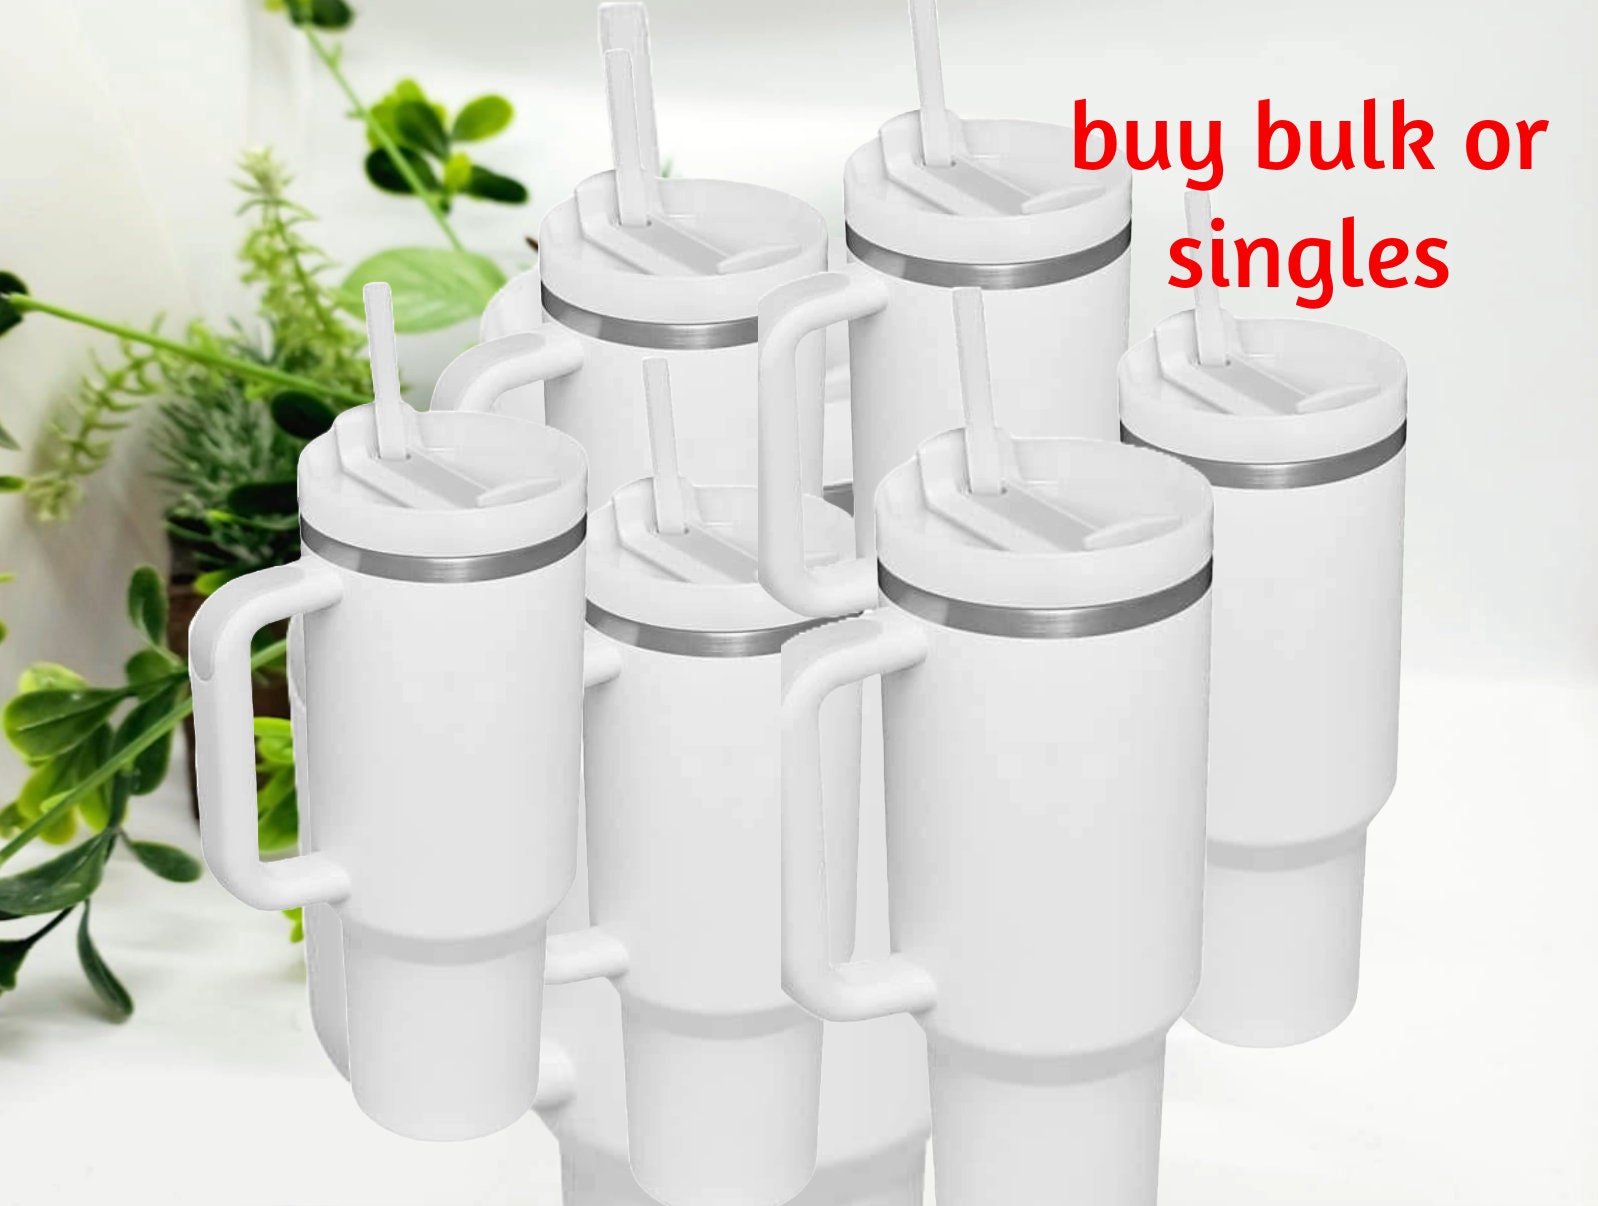 Wholesale Bulk 20oz Stainless Steel Insulated Cheap Sublimation Tumblers  With Straw And Lid Straight Slim Design For Sublimation Blank Cups JY08  From Bazaarlife, $0.42